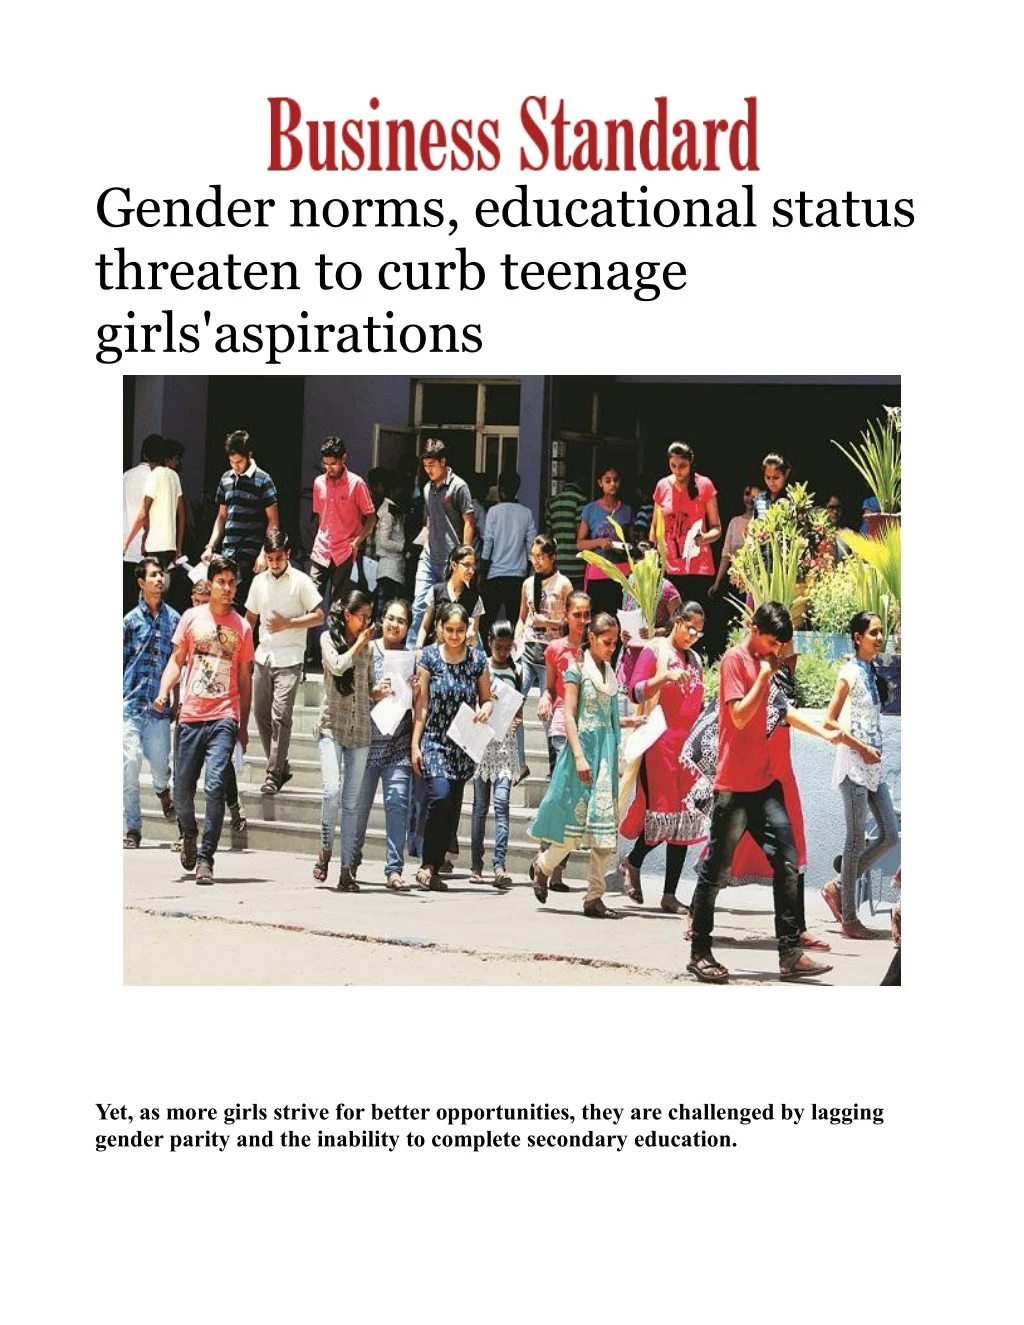 gender norms educational status threaten to curb